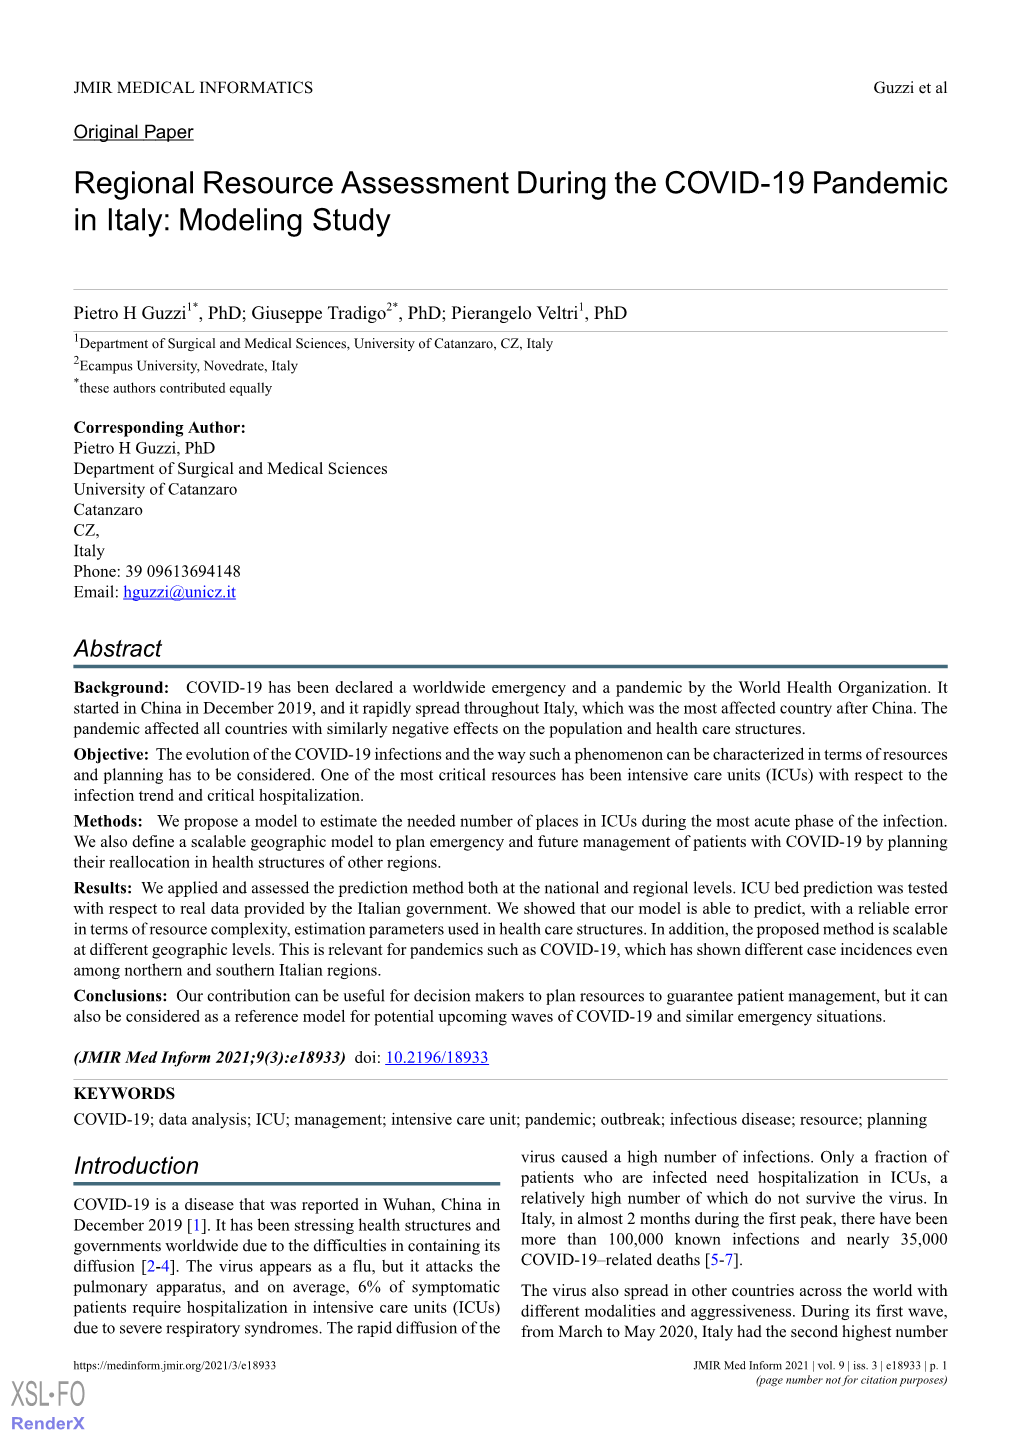 Regional Resource Assessment During the COVID-19 Pandemic in Italy: Modeling Study